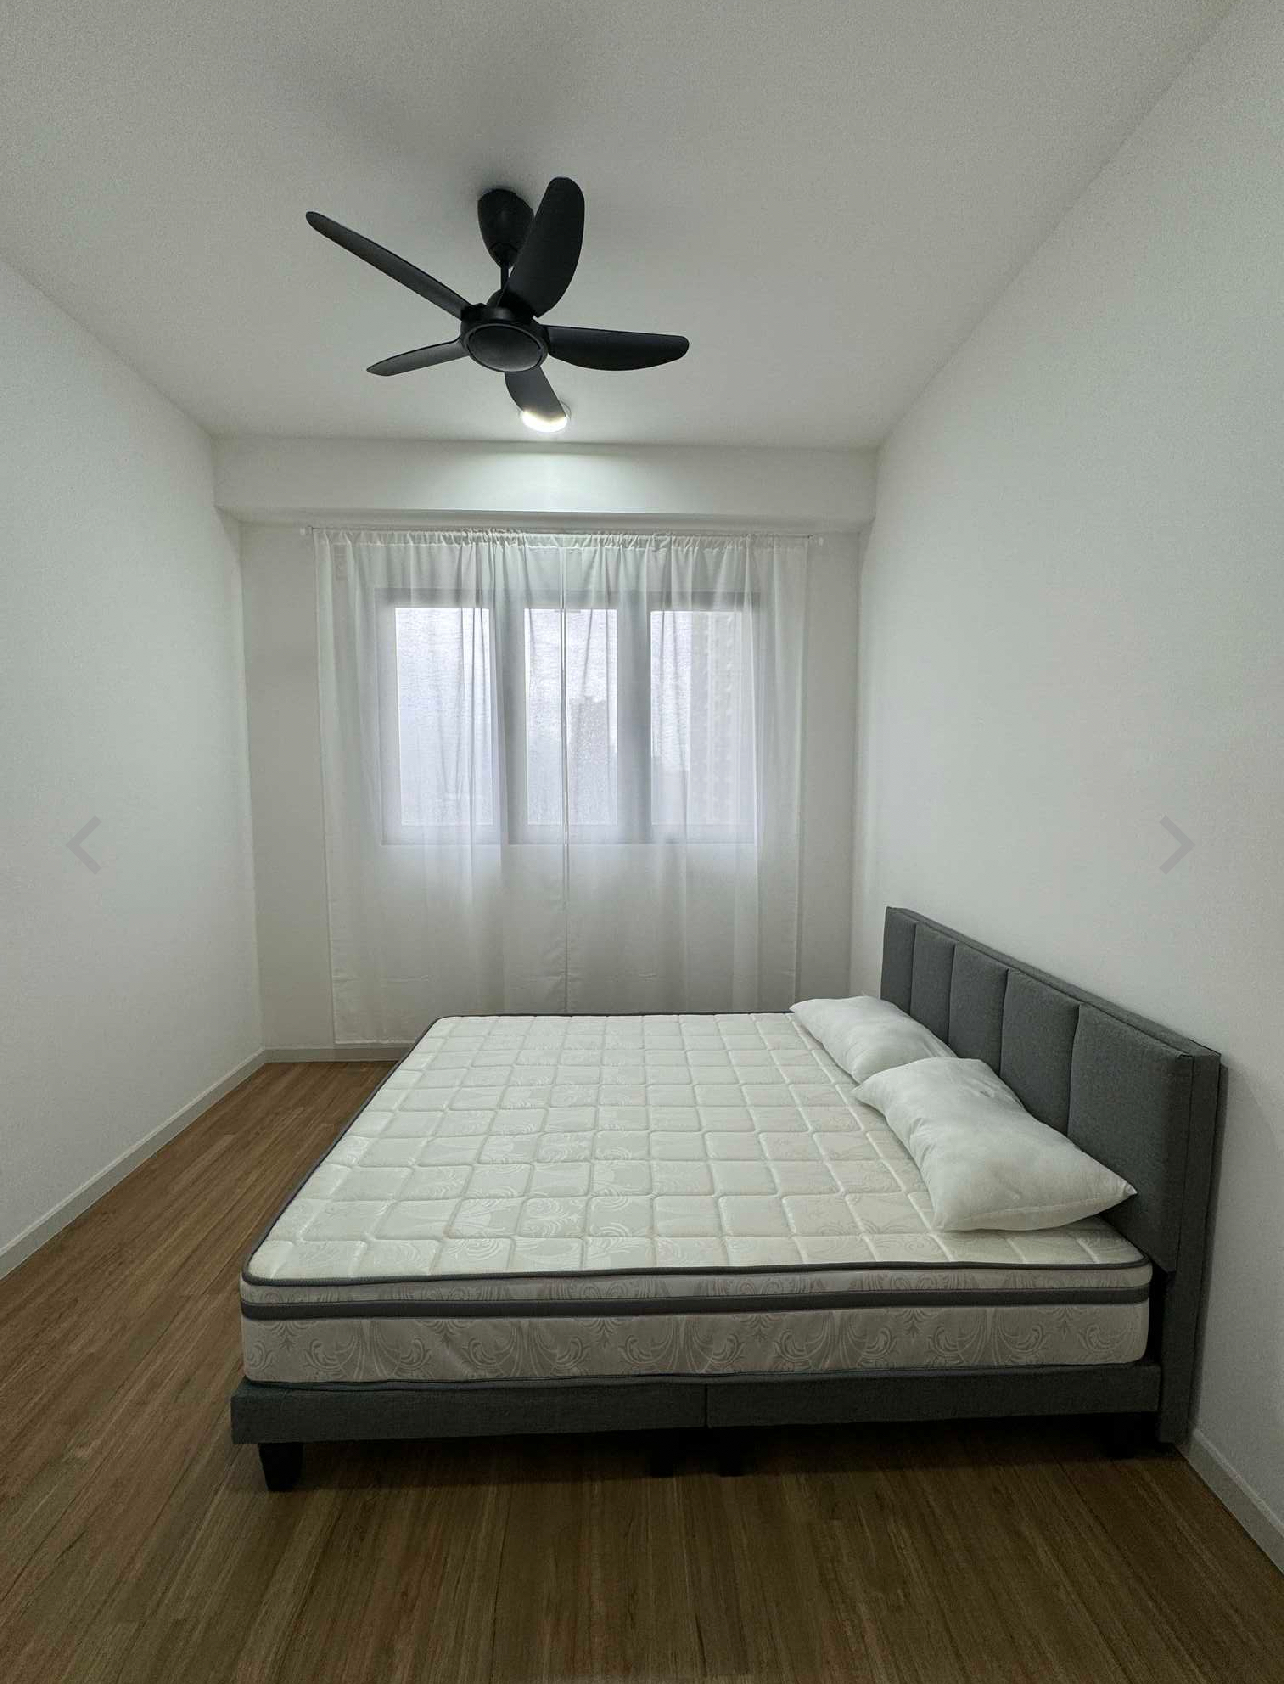 room for rent, studio, zenopy residences lobby road, Send the owner a message on WhatsApp/facebook if you want to RENT the unit(Mohammed Nhat)&Telegram(@muhammednhat101)